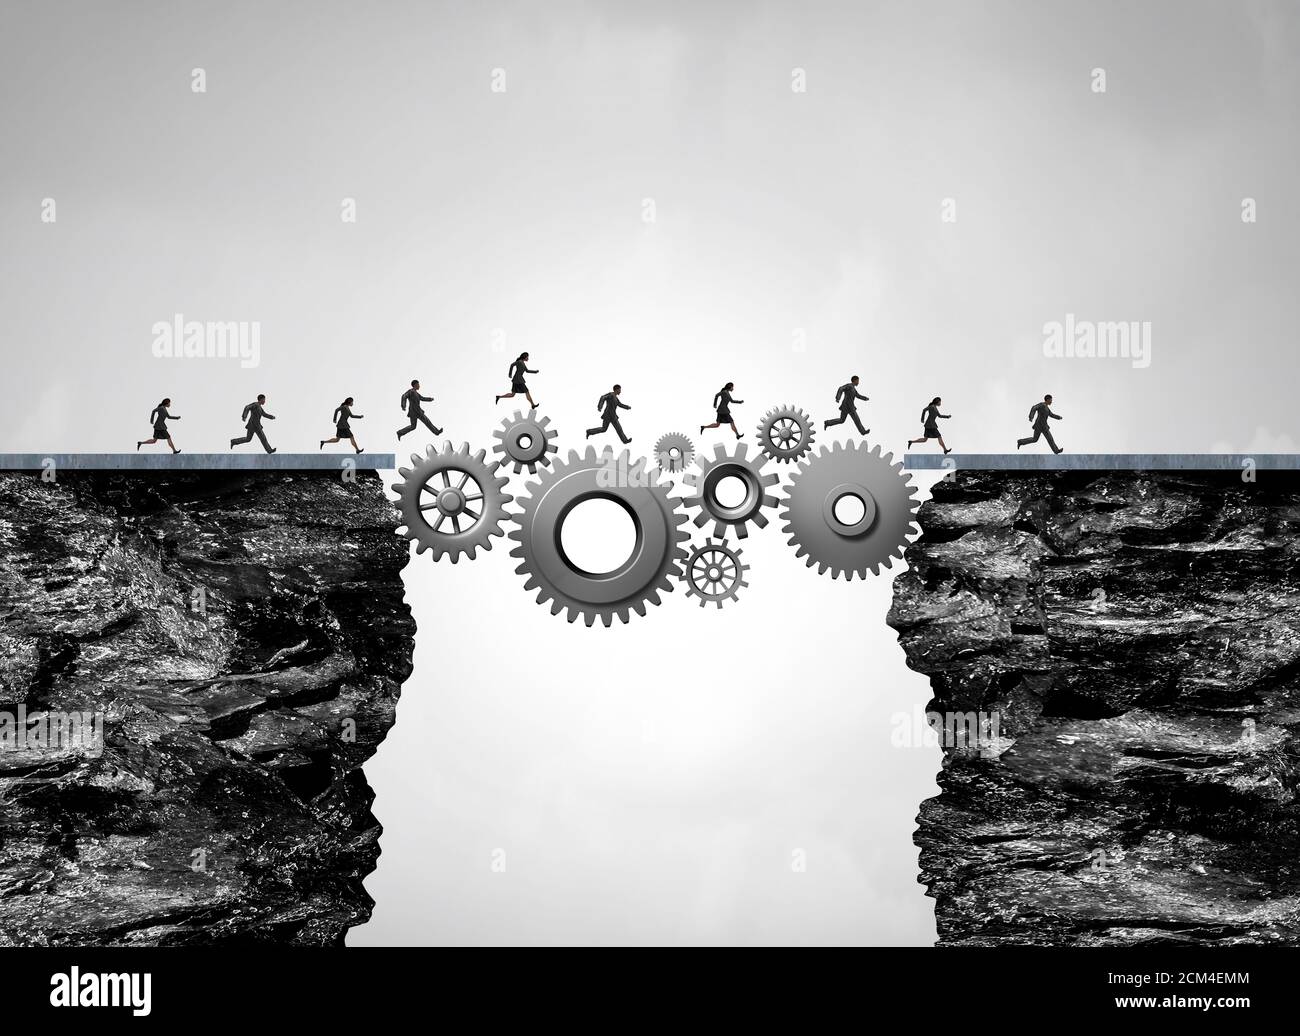 Business bridge as an industry success concept as workers or people crossing a path made of gears and cogs with 3D render elements. Stock Photo